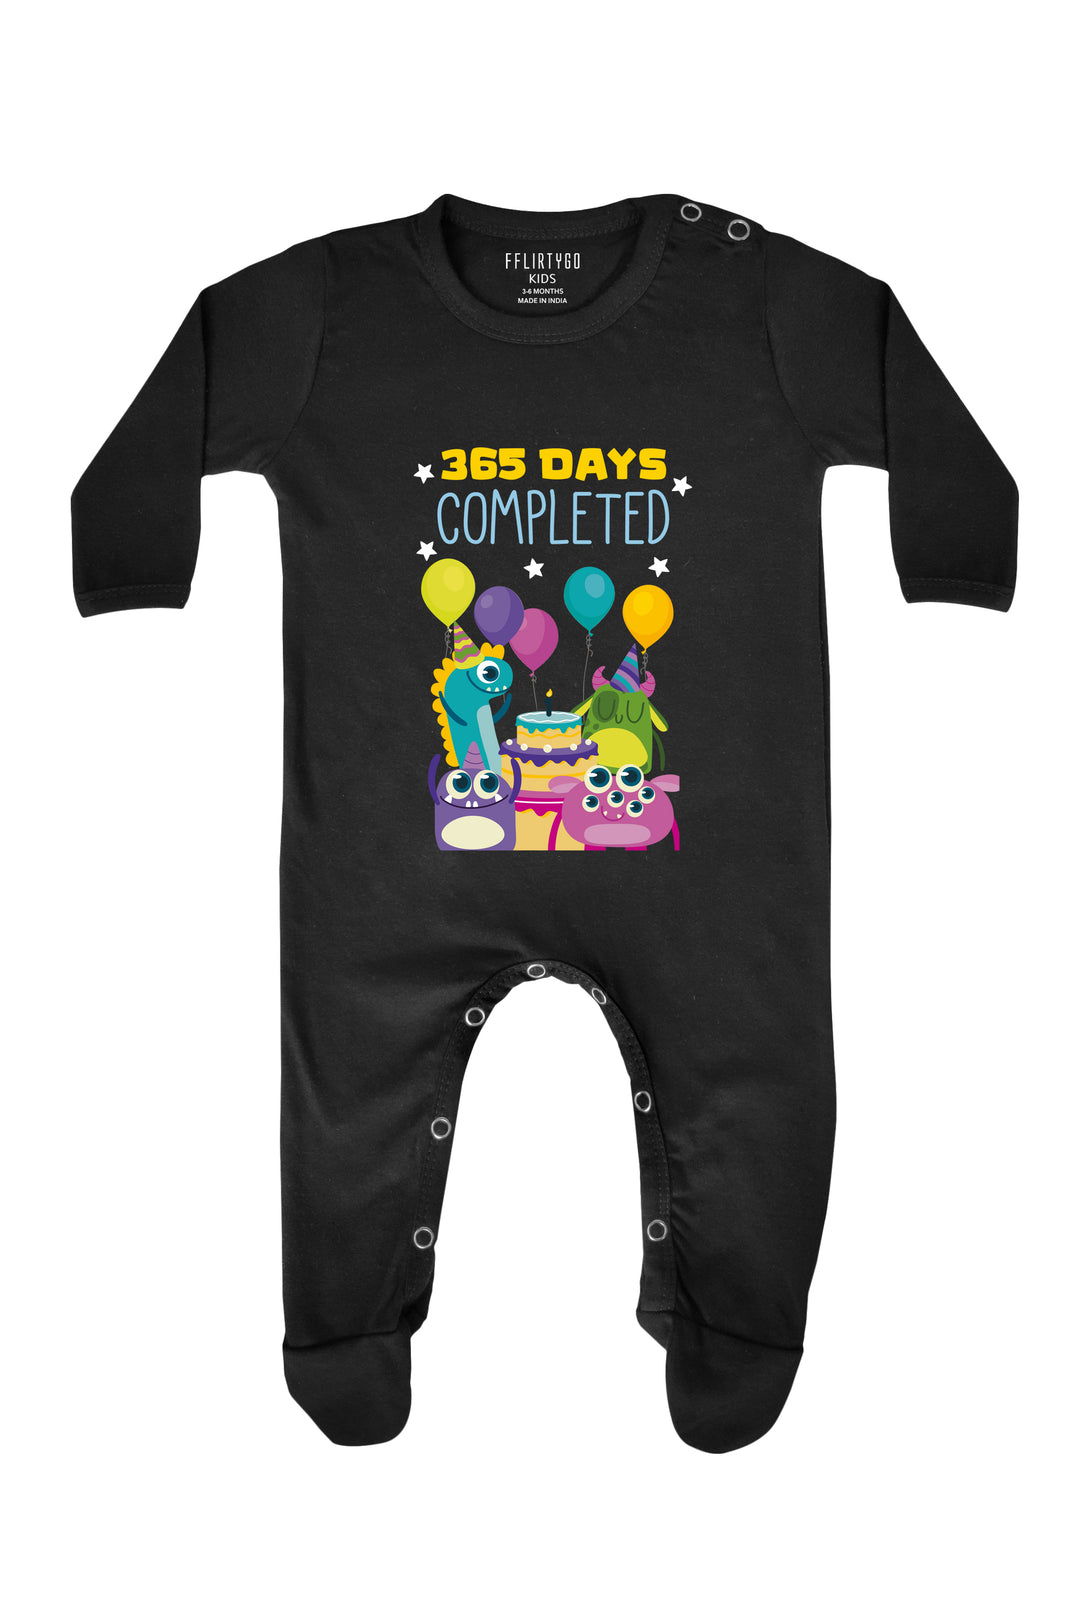 365 Days Completed Baby Romper | Onesies - Party Romper